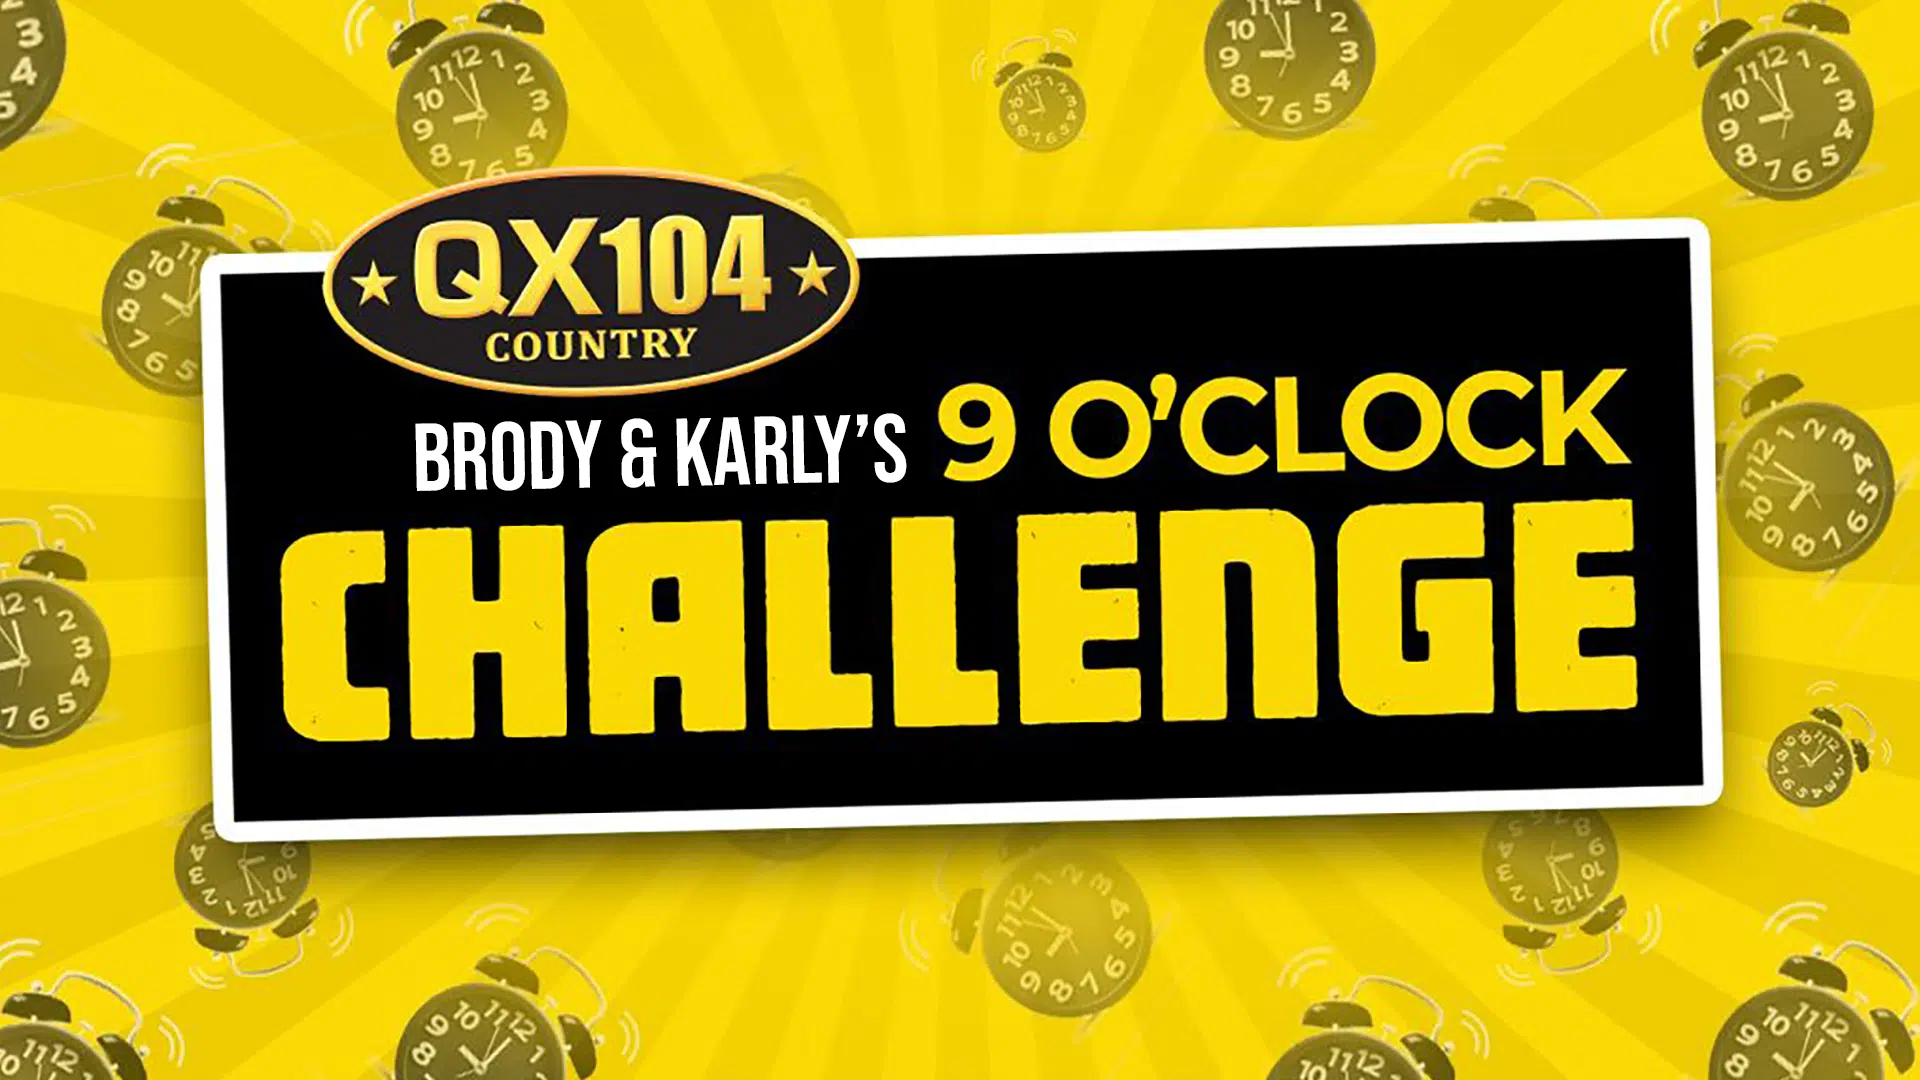 Brody and Karly’s 9 O’clock Challenge